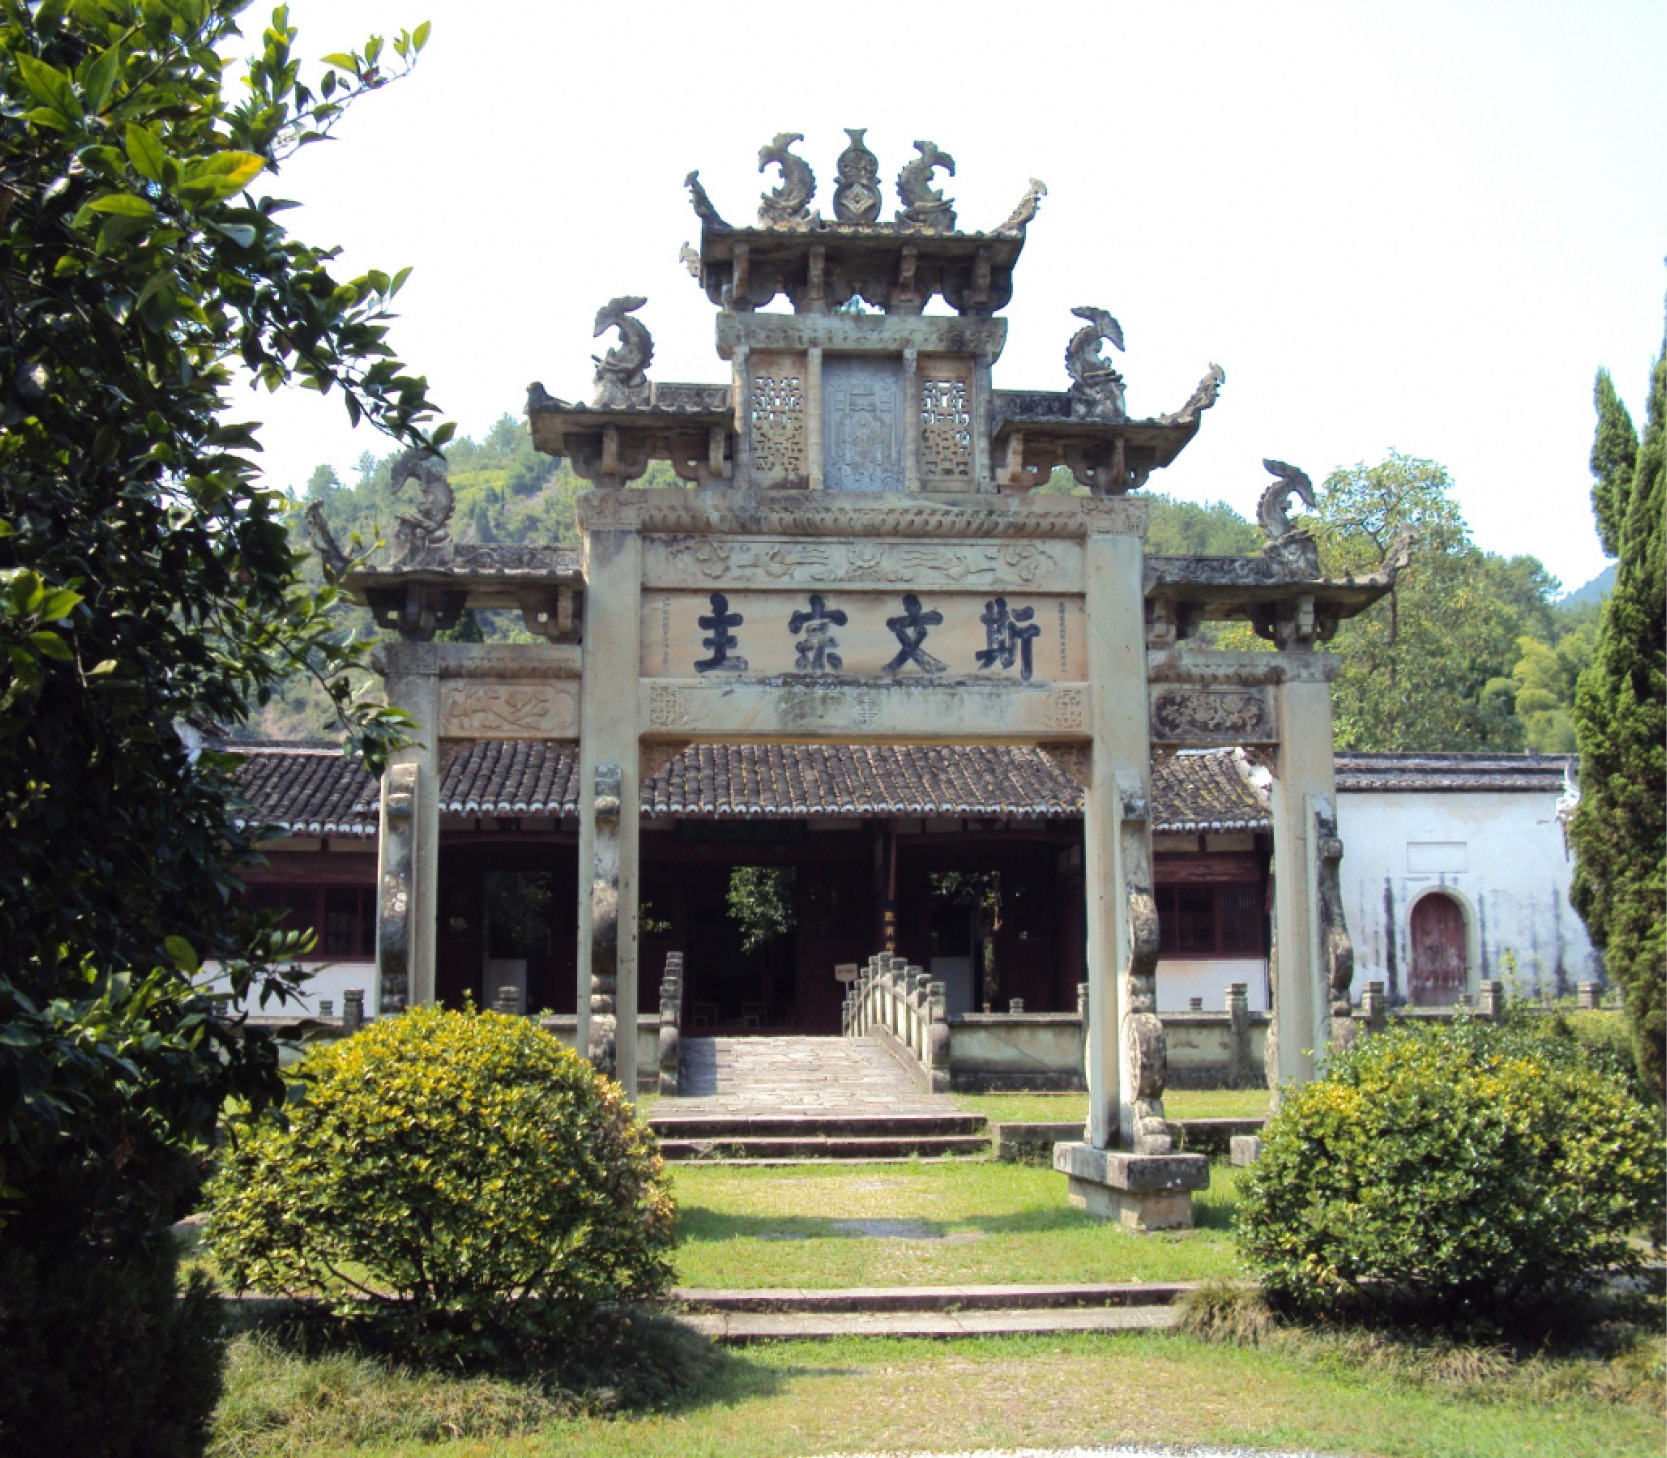 Chinese arch monument